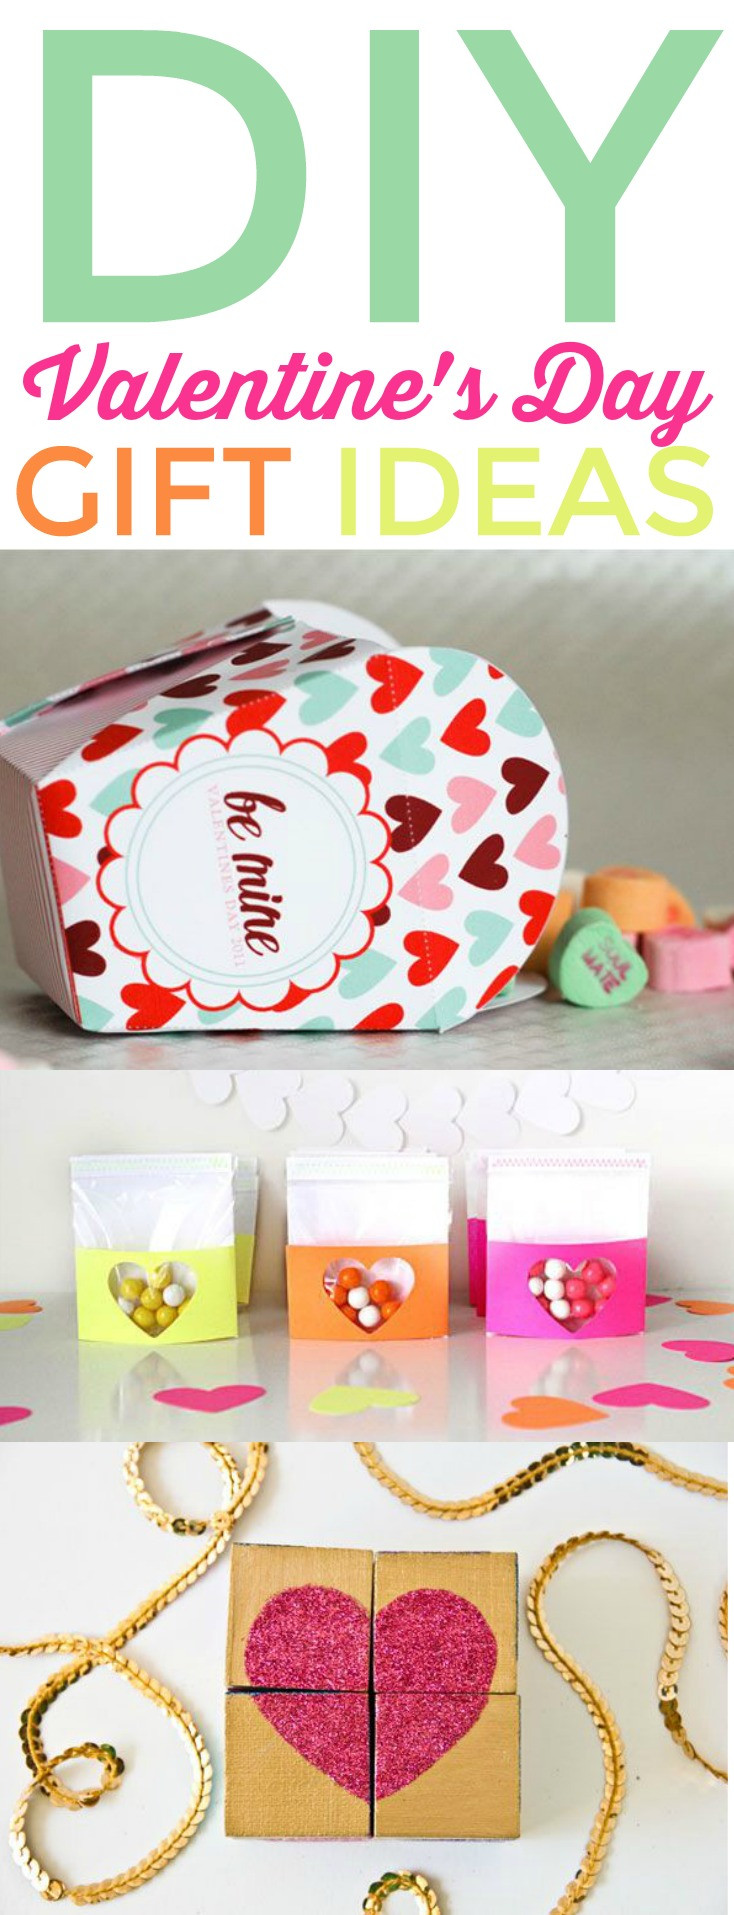 Valentines Gift Ideas DIY
 DIY Valentines Day Gift Ideas A Little Craft In Your Day